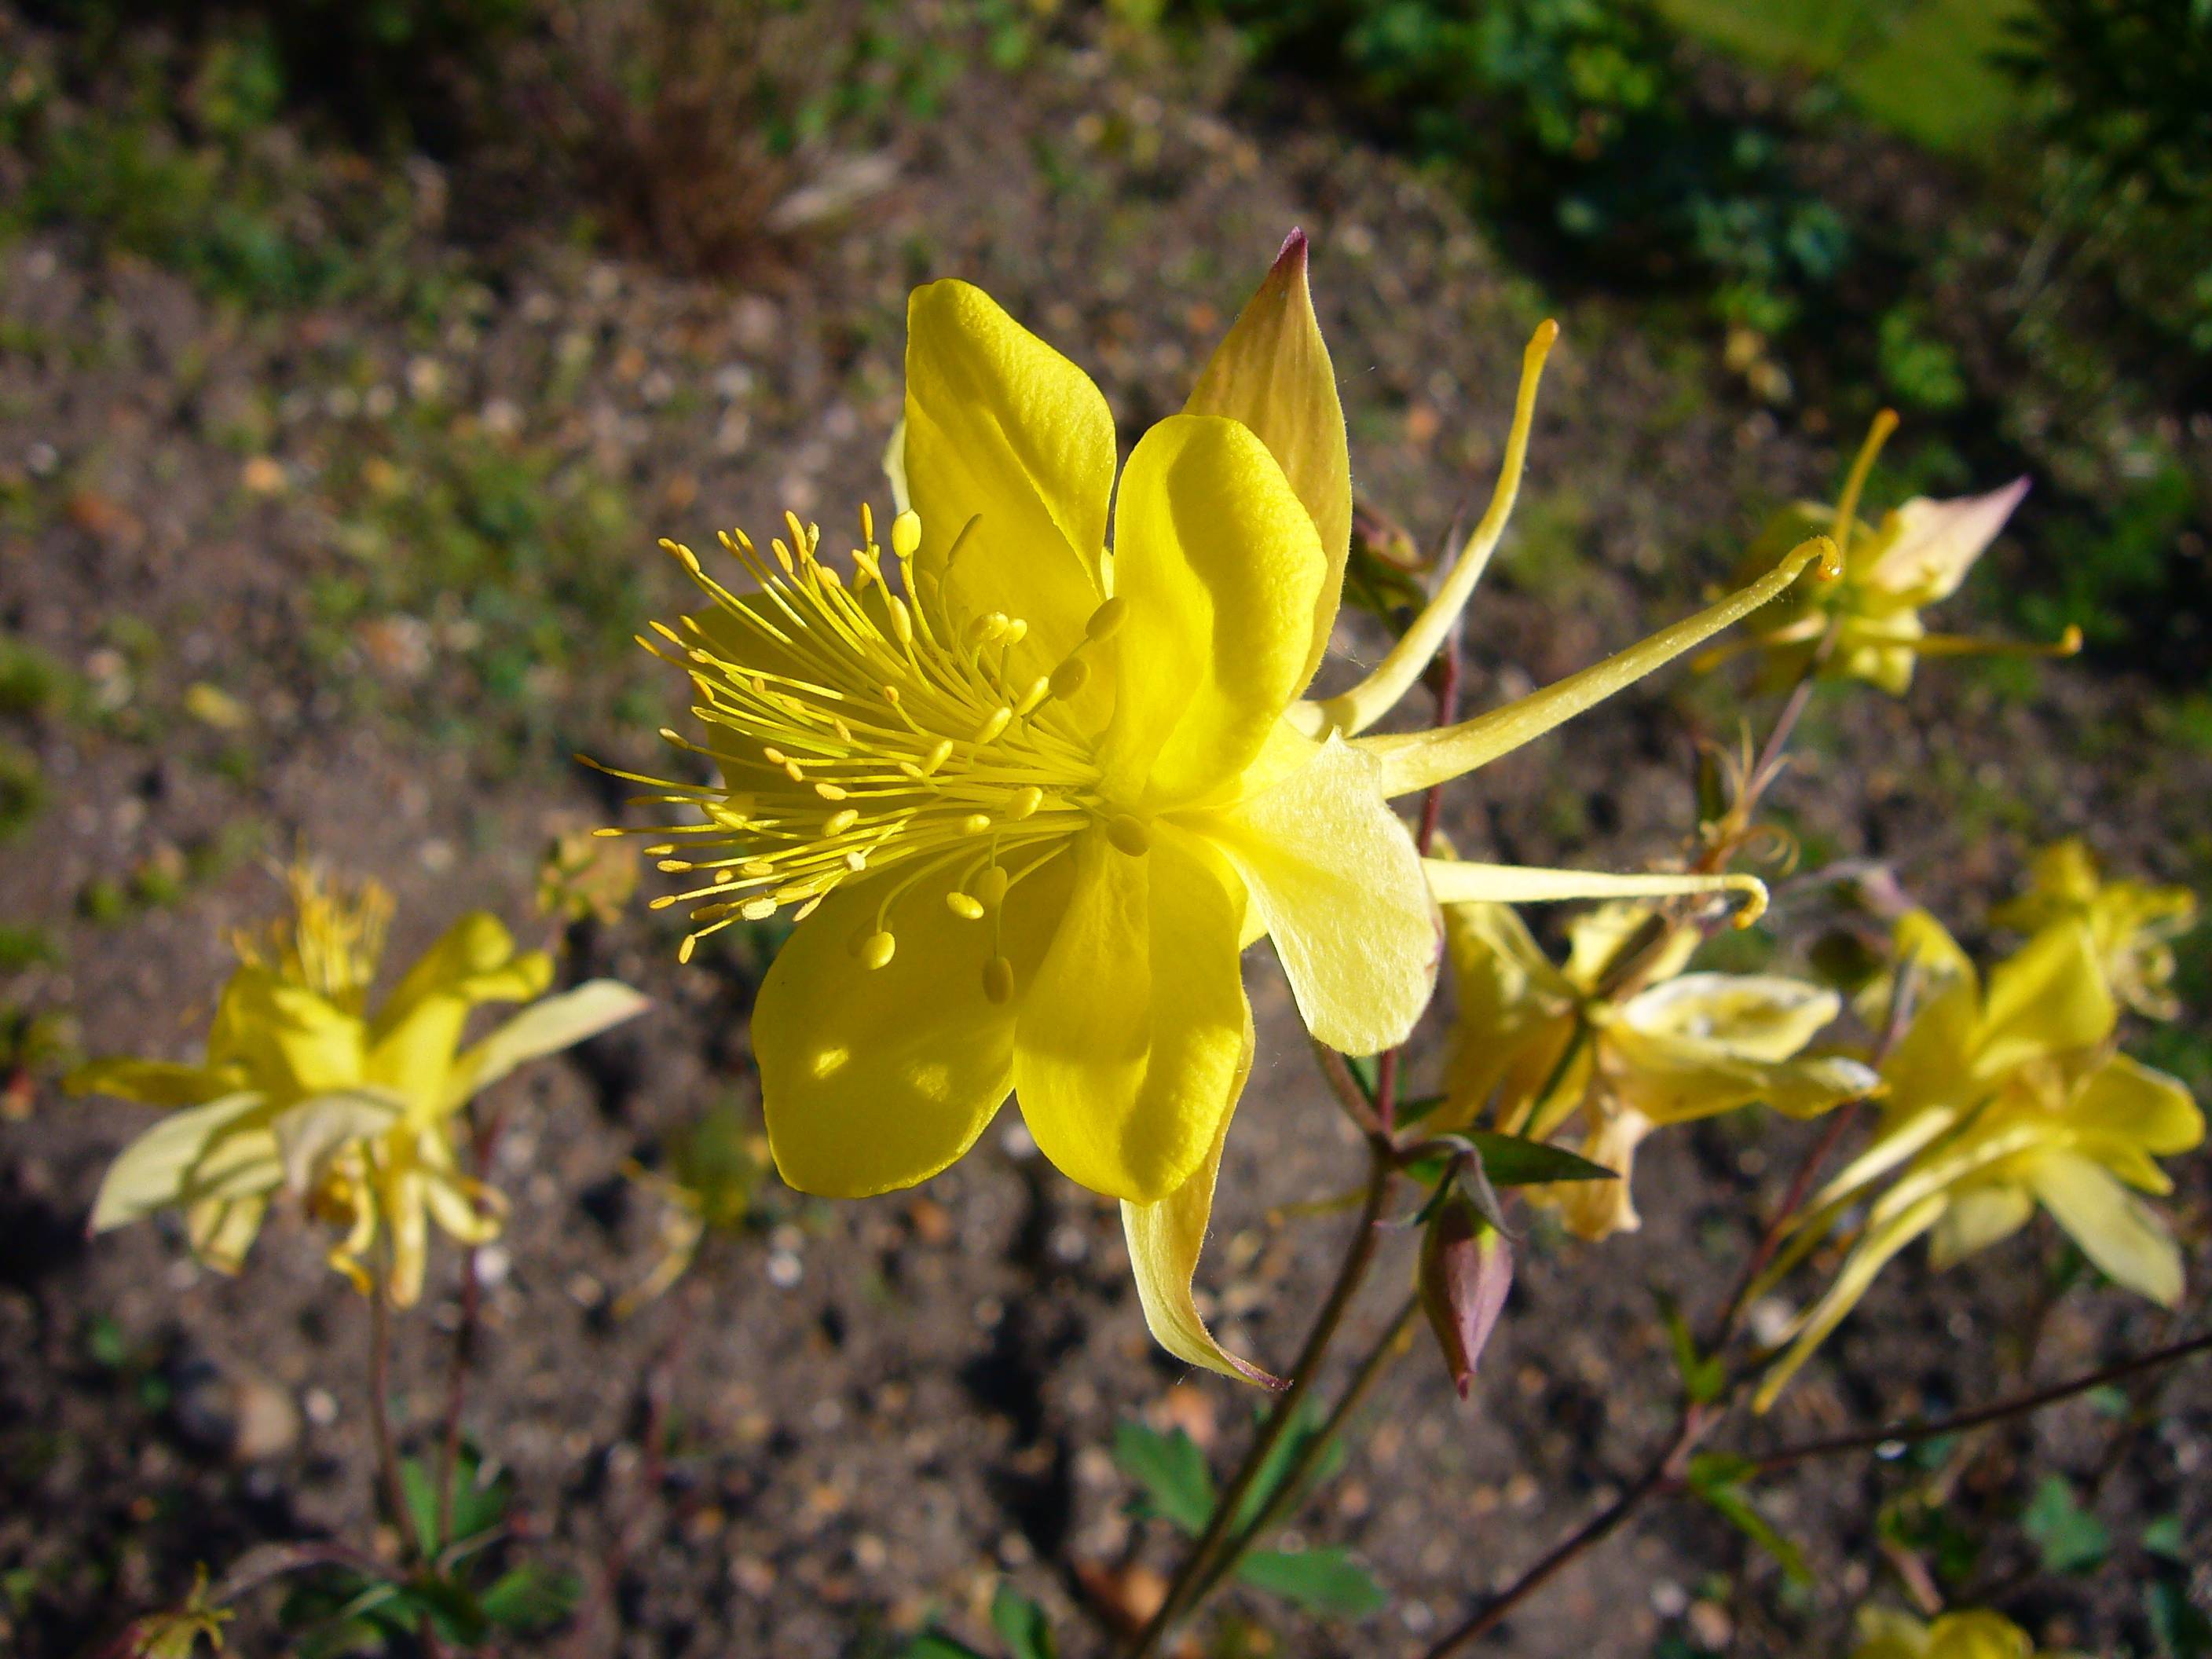 yellow flowers with yellow stamens, brown buds, green leaves and brown stems